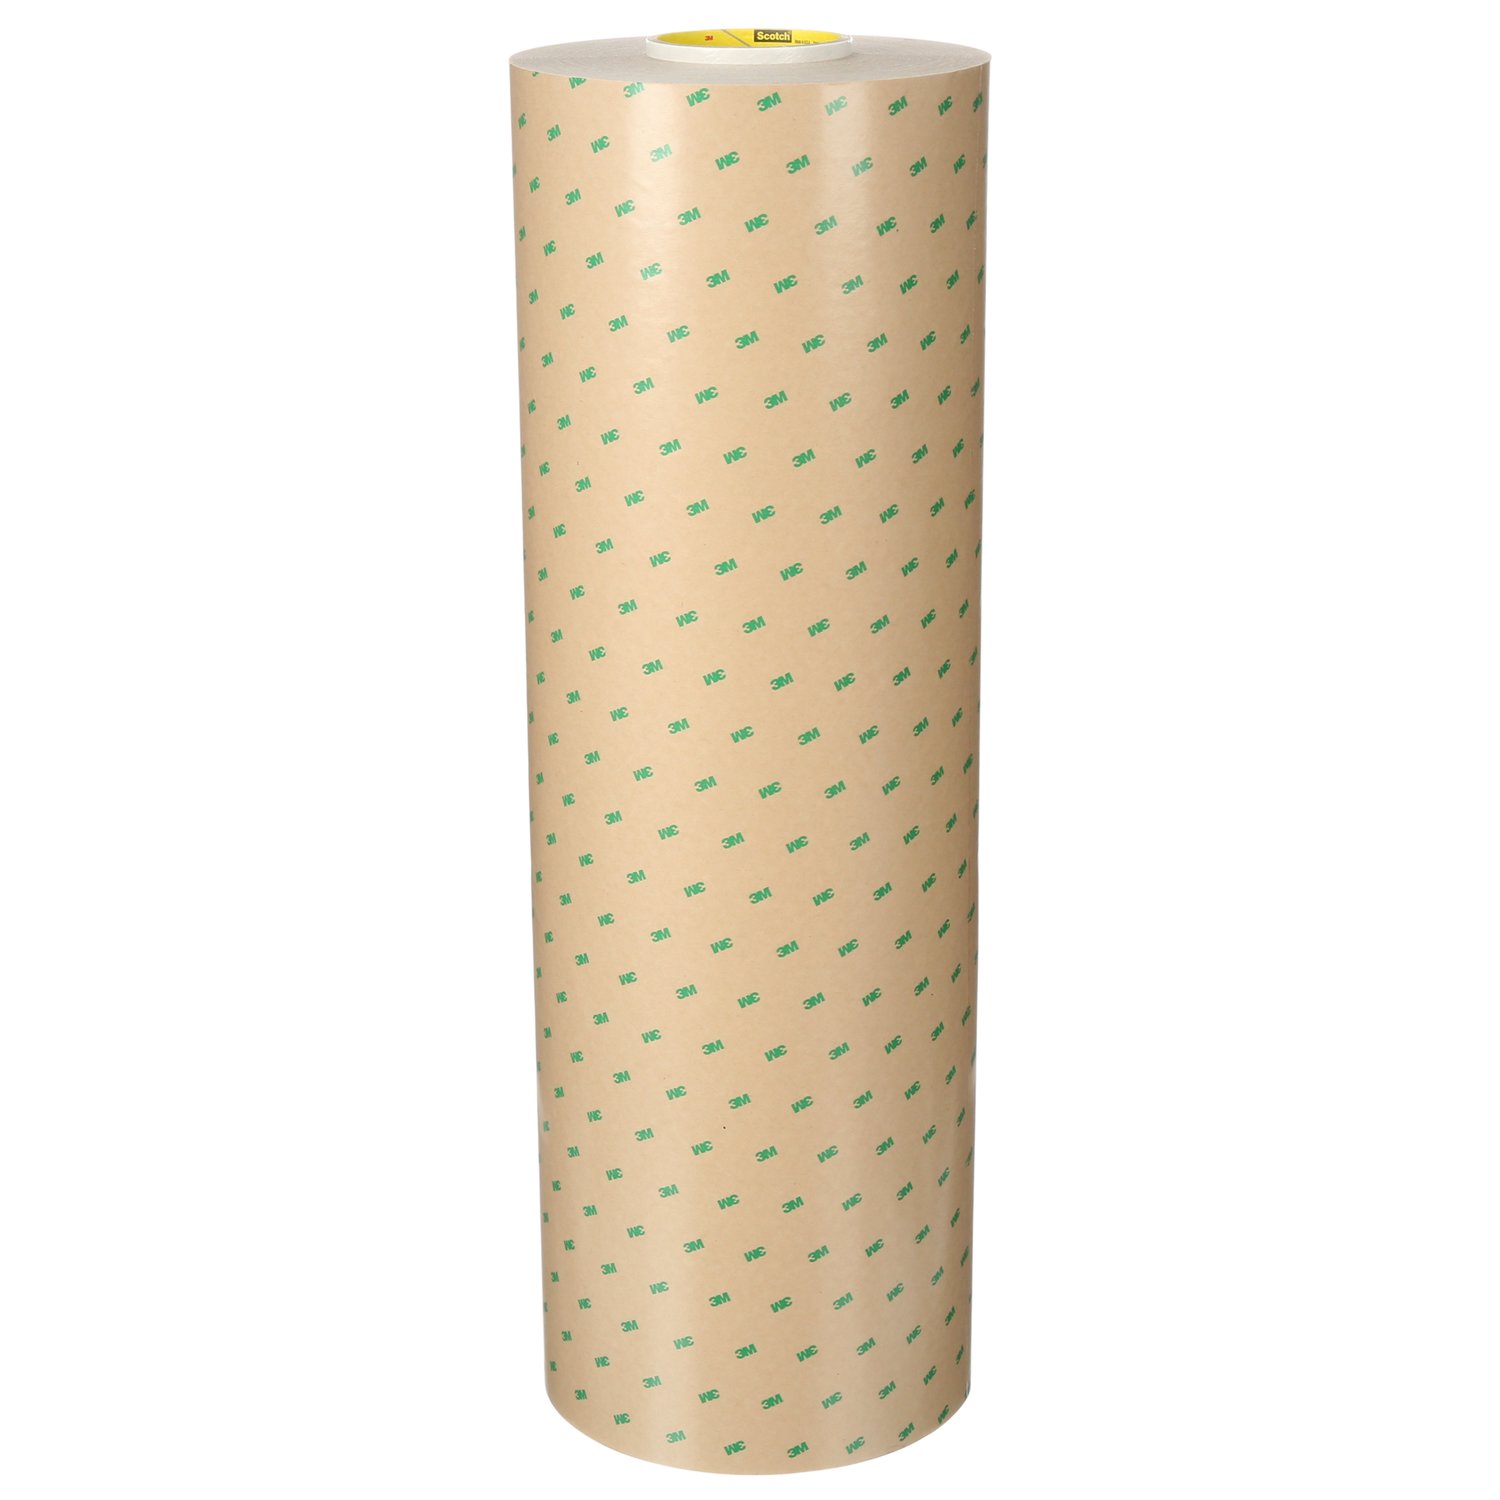 7010335161 - 3M Adhesive Transfer Tape 9502, Clear, 48 in x 60 yd, 2 mil, 1 roll per
case